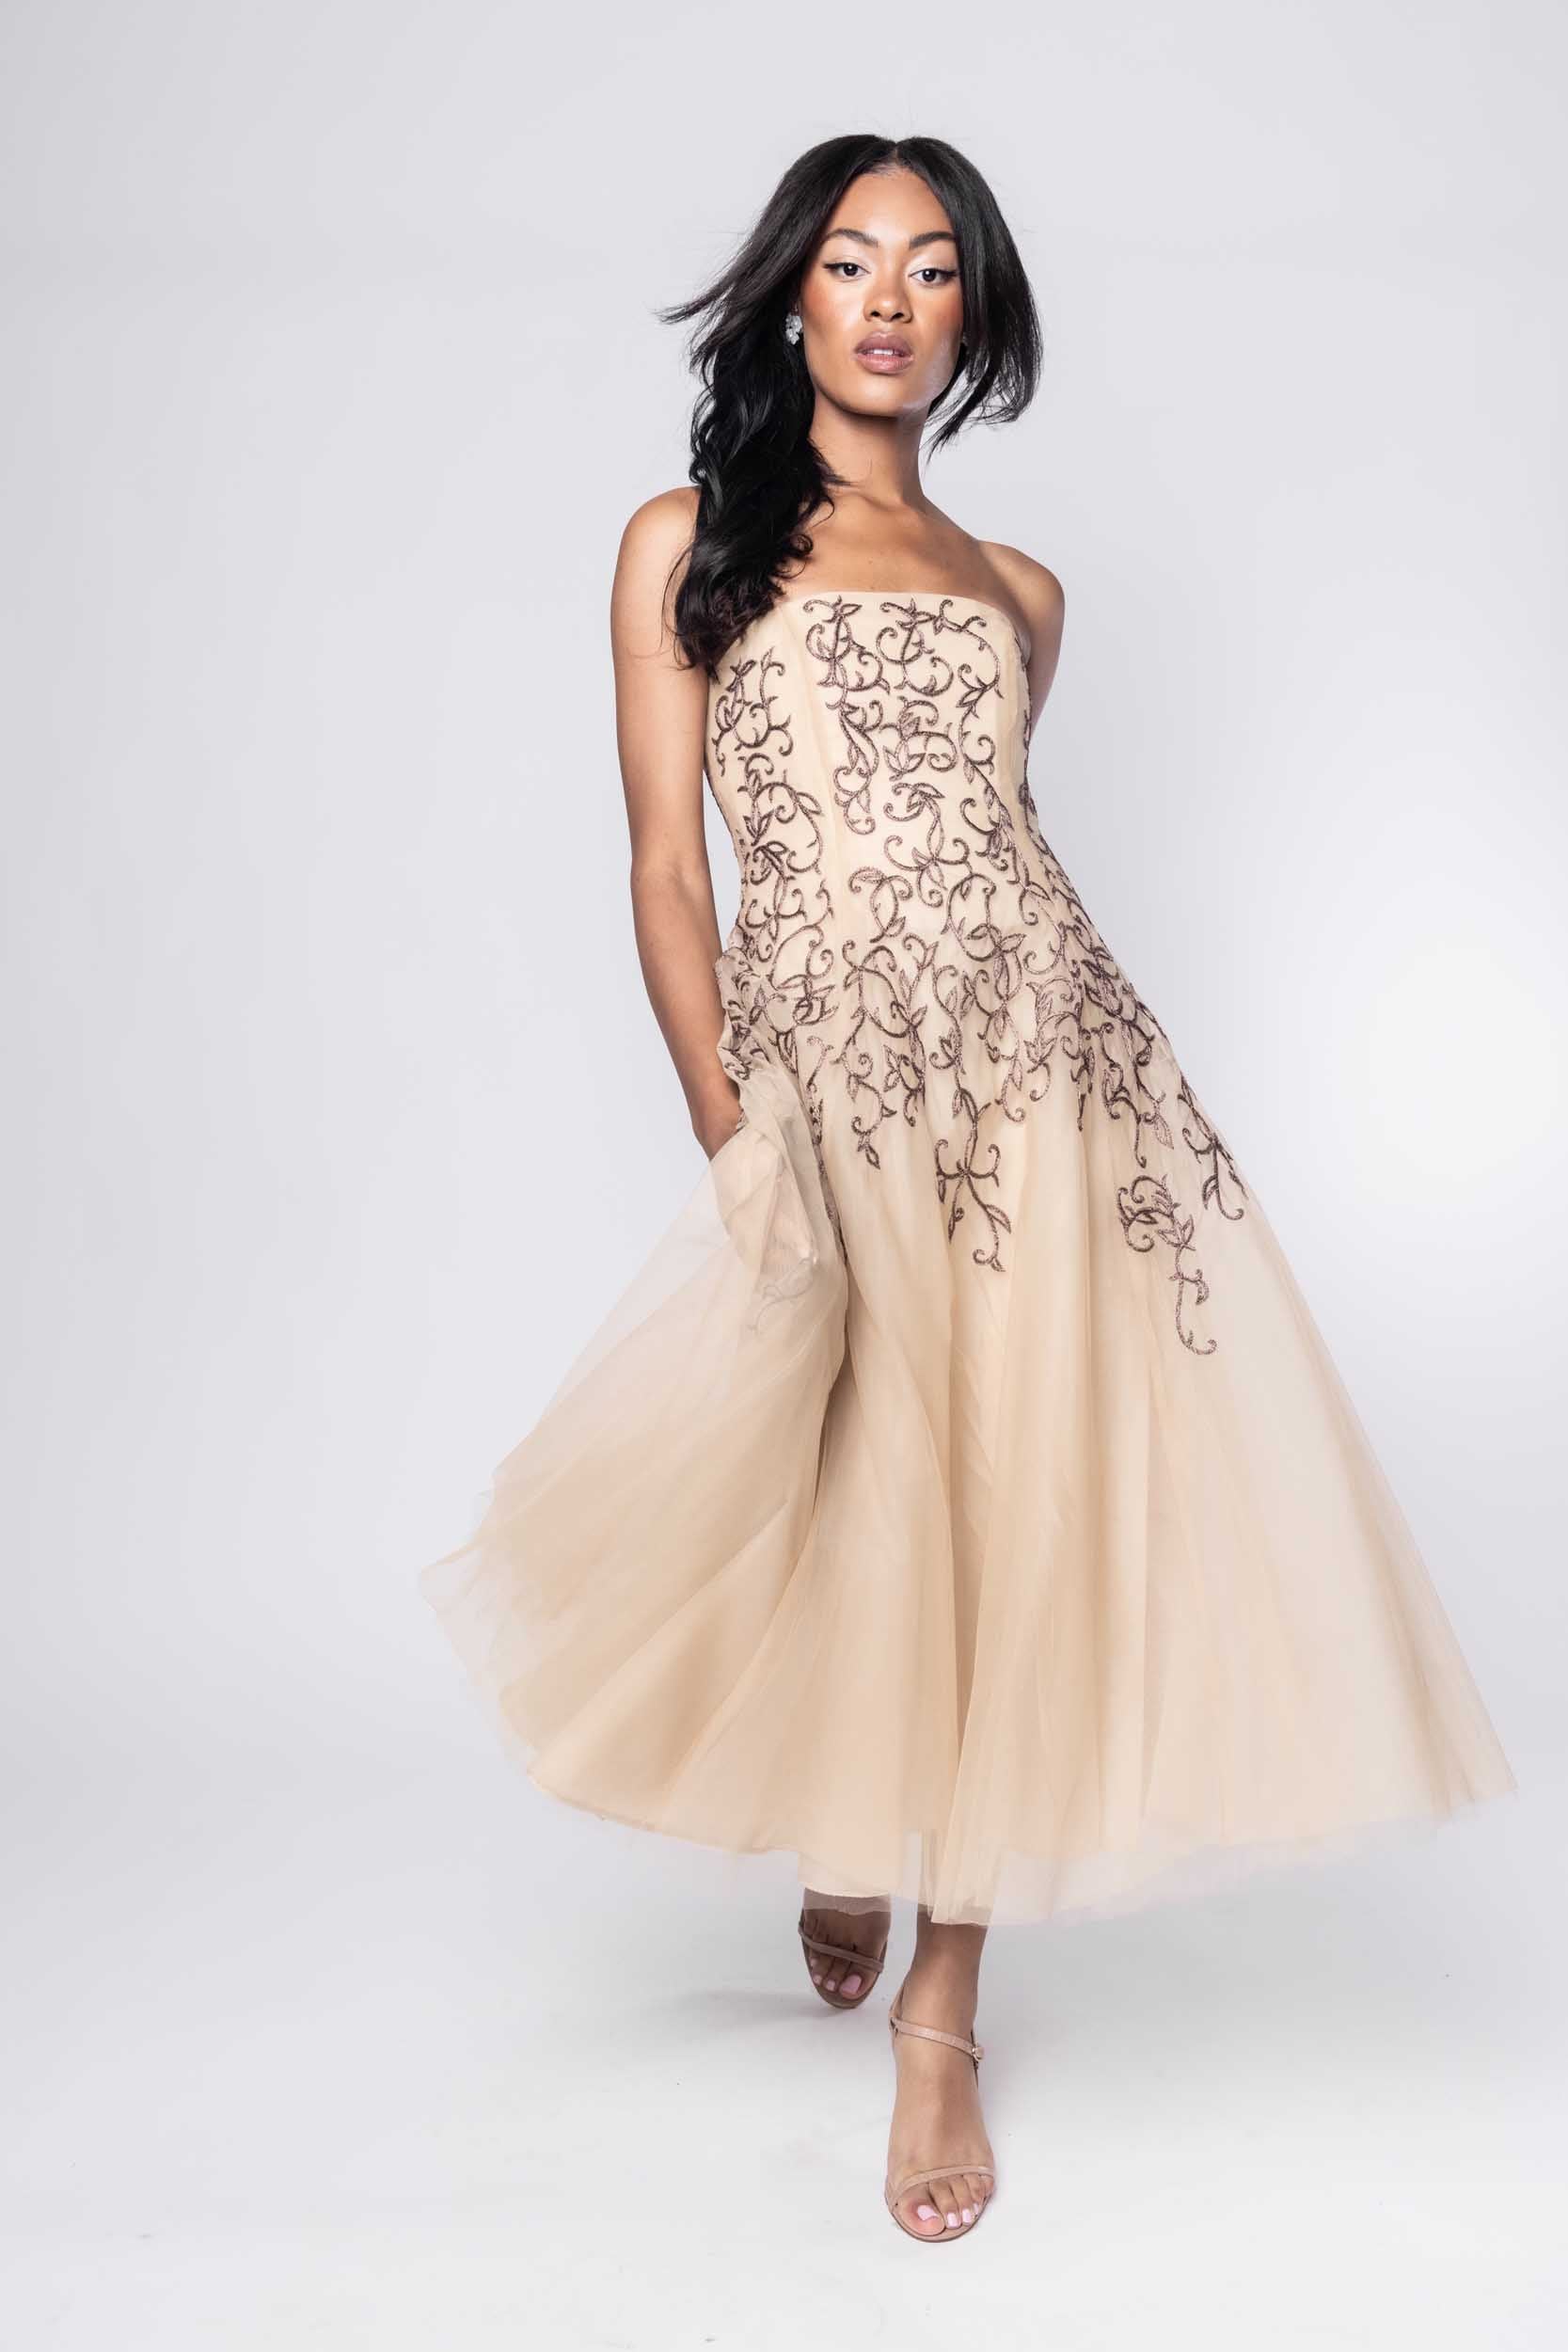 Beautiful model in nude Sujata Gazder dress with ornate stitching - movement view